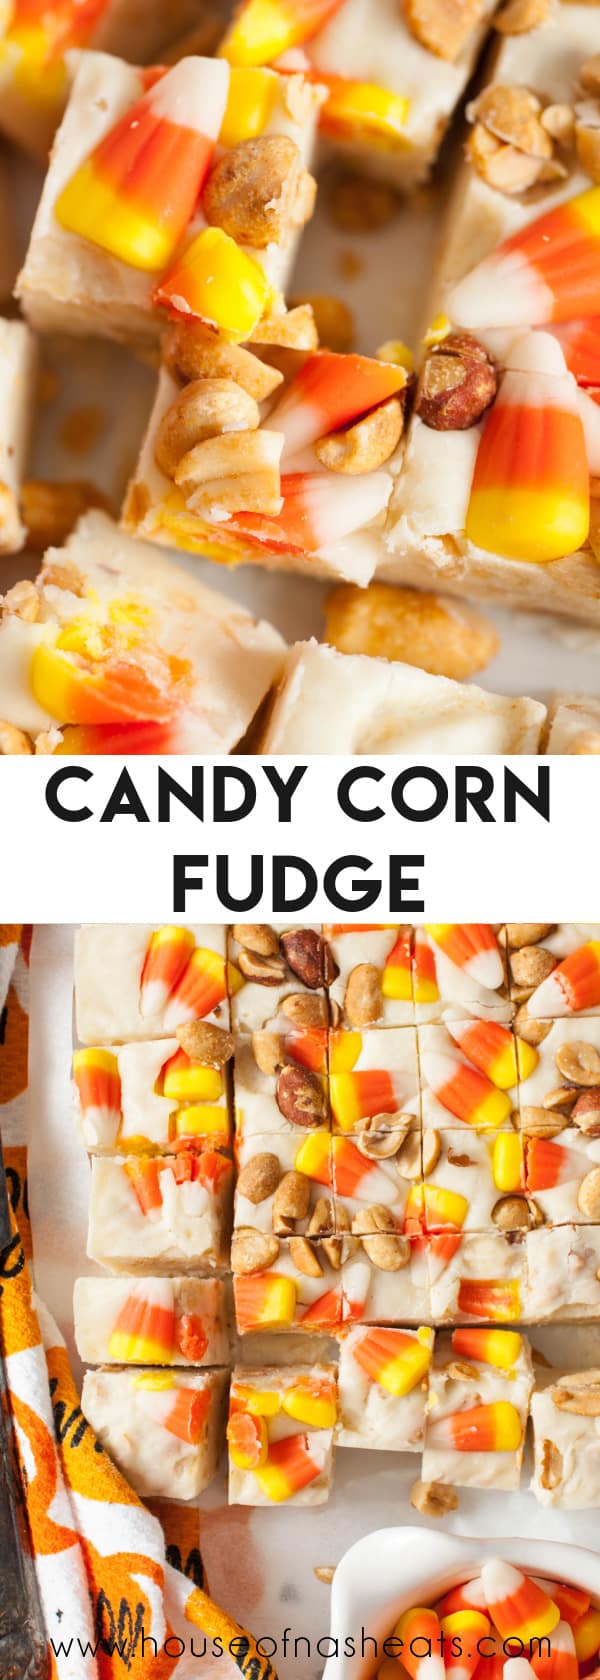 A collage of images of candy corn fudge with text overlay.